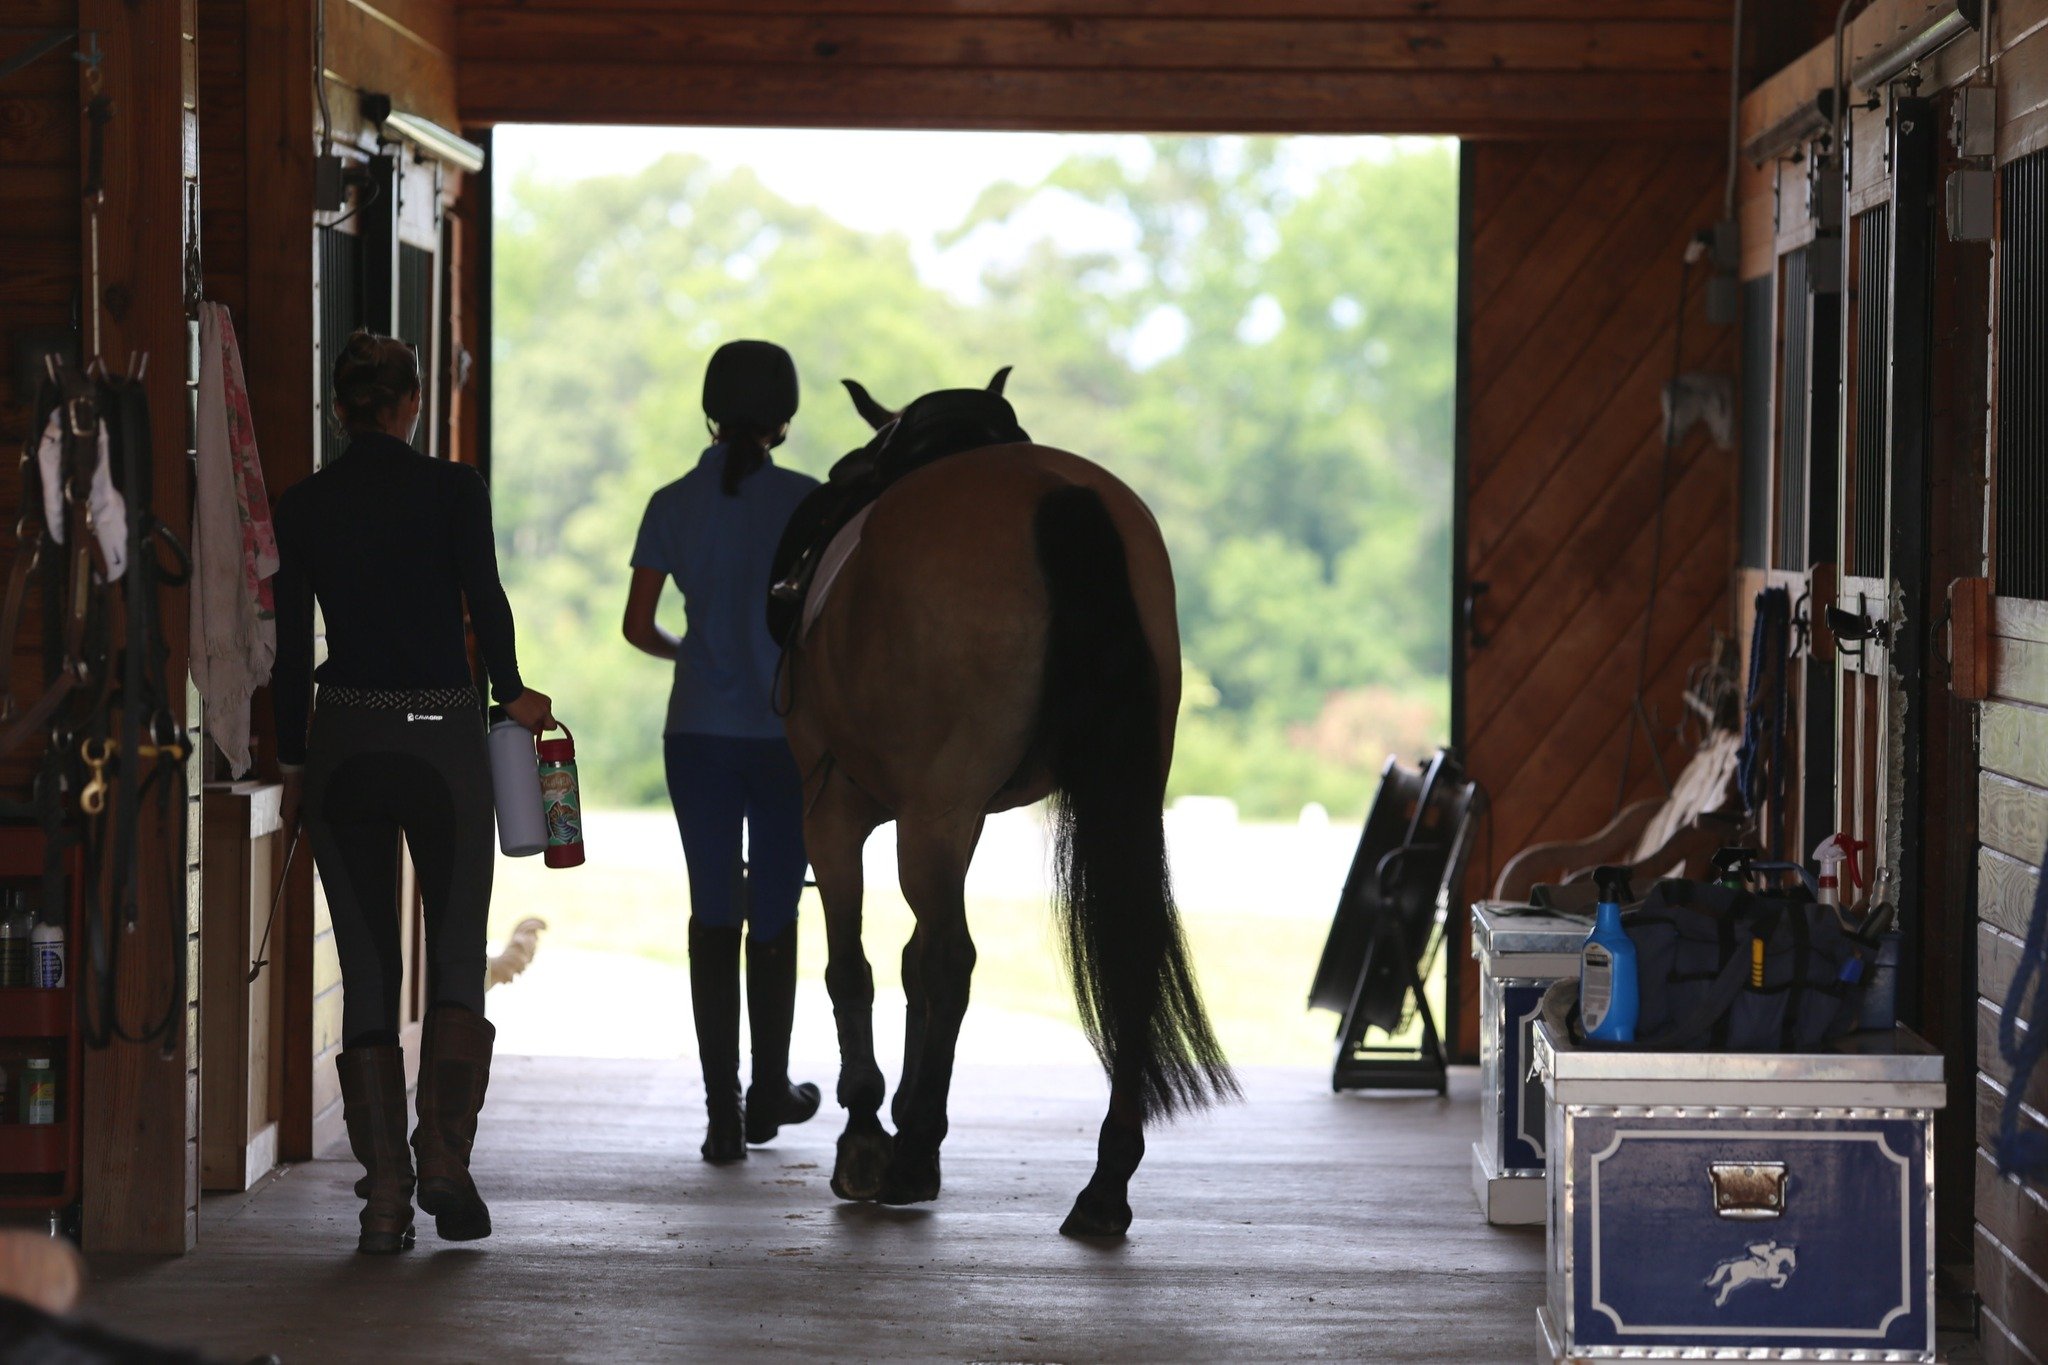 As an Adult Amateur equestrian, you likely have a lot on your plate: a job, family, and other obligations. You want to ride, and you&rsquo;re interested in quality instruction, but you don&rsquo;t have tons of time to spend &ldquo;shopping around&rdq